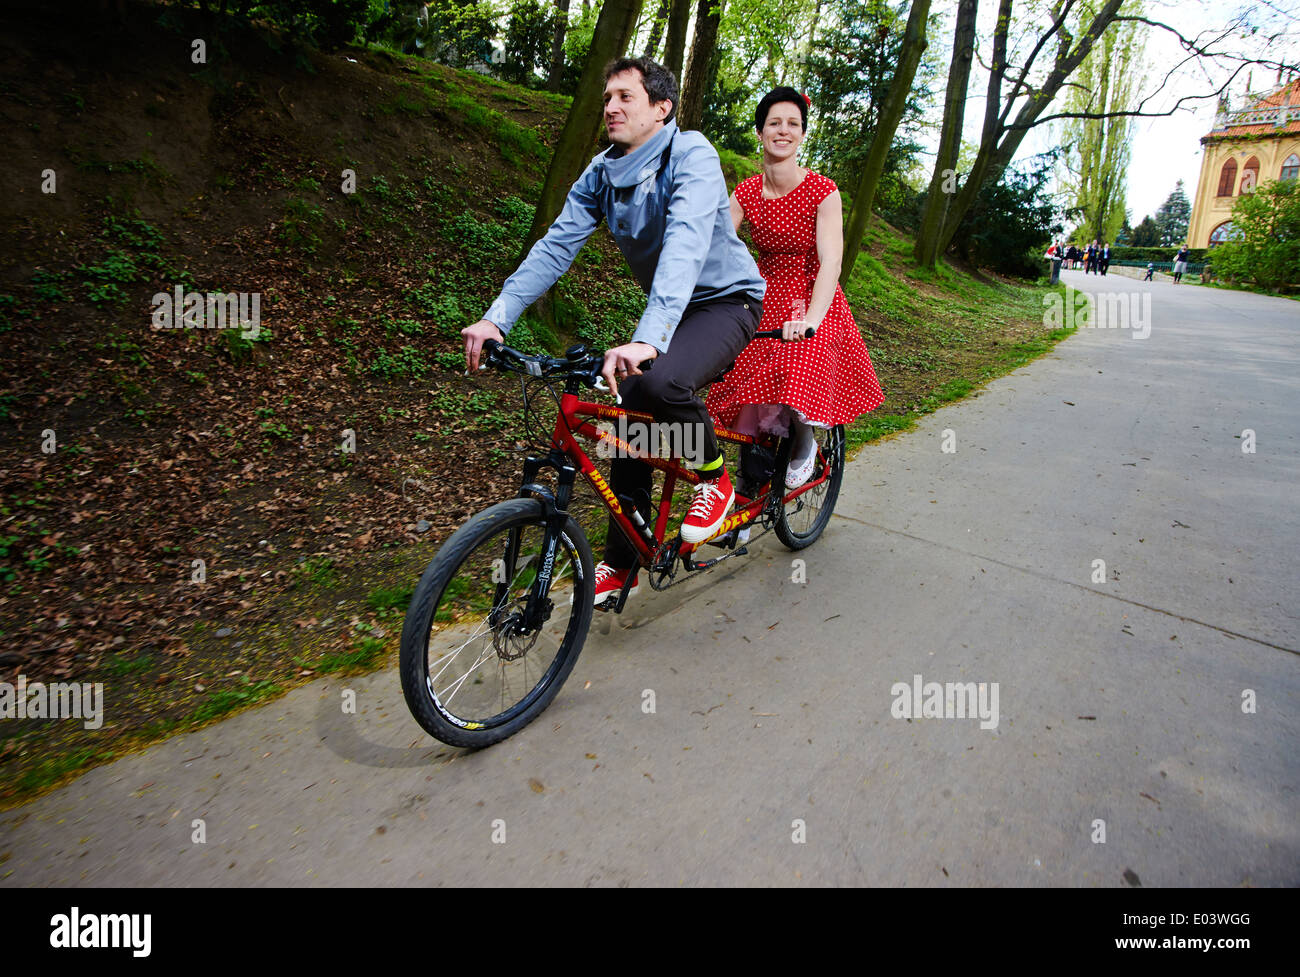 Couple young man and woman riding a tandem bicycle, cycling in park Stock Photo